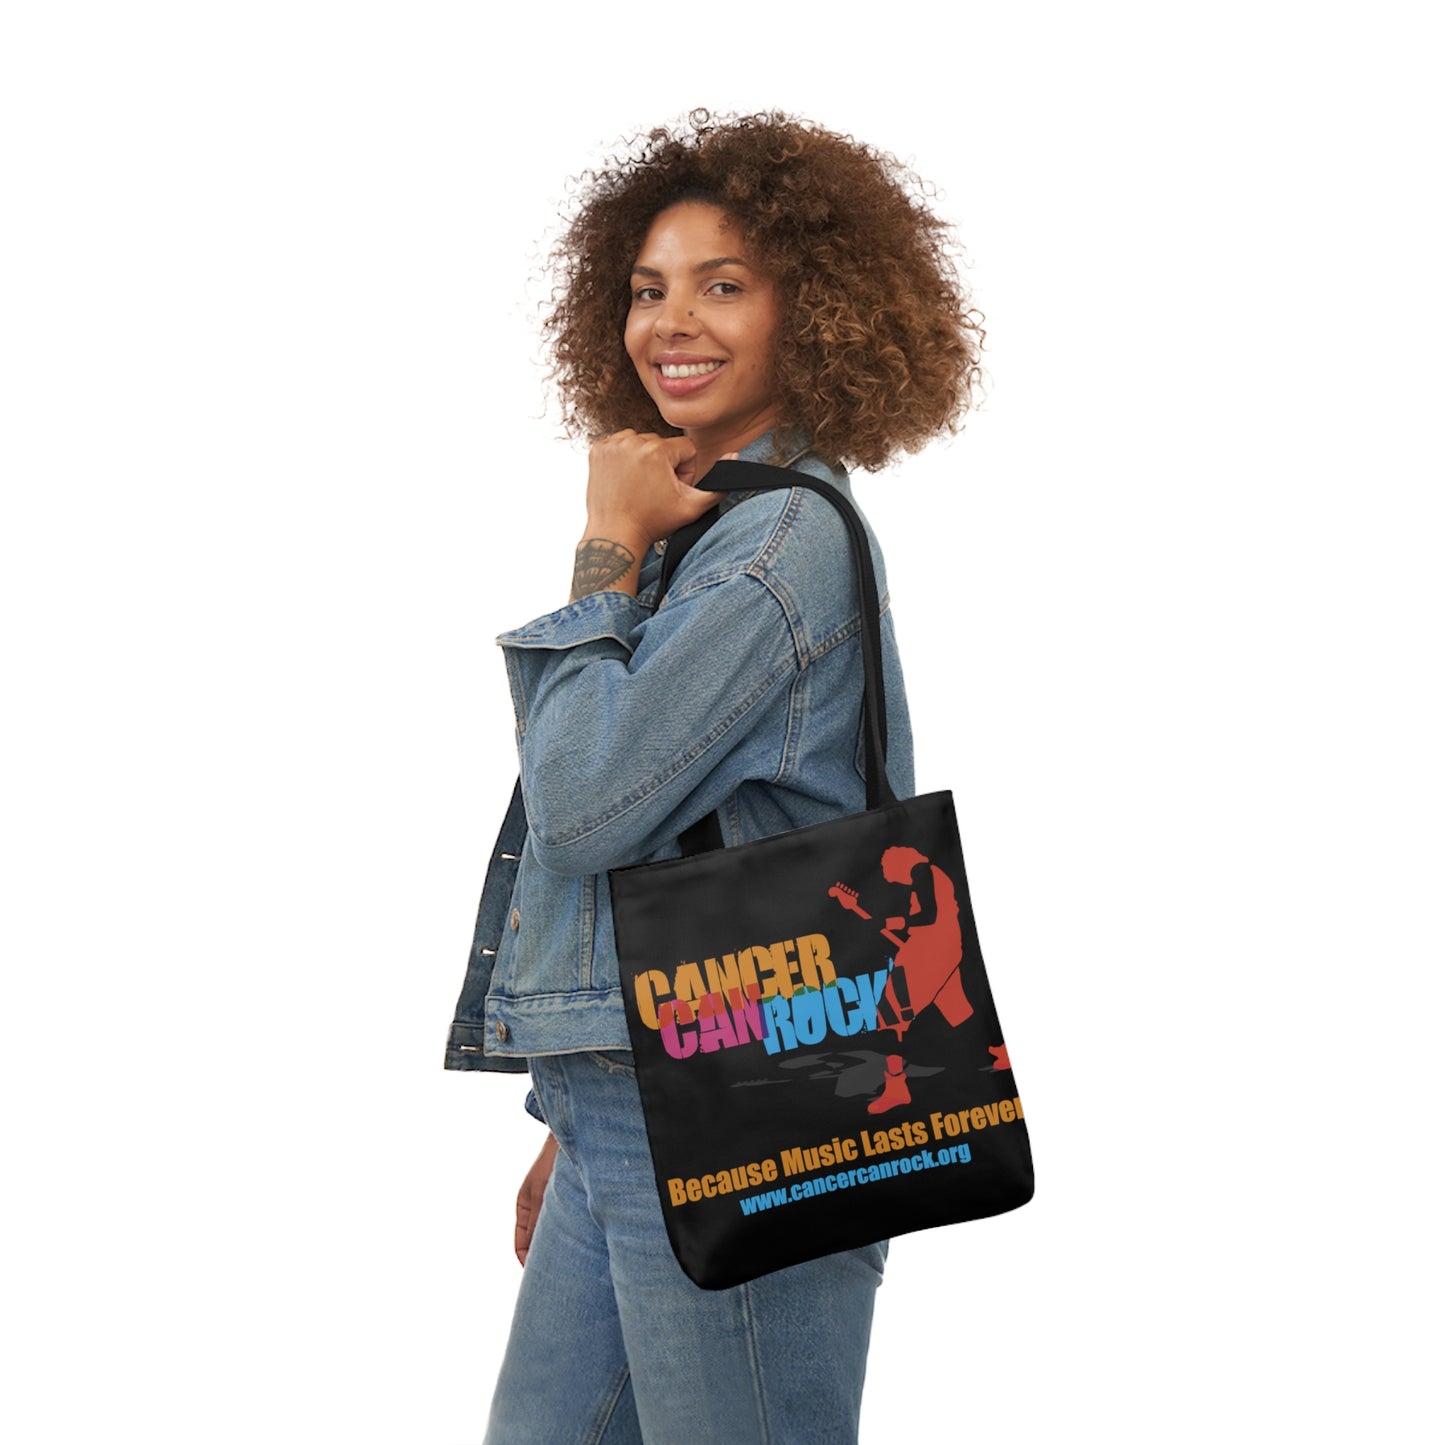 Tote Bag - Poly Canvas